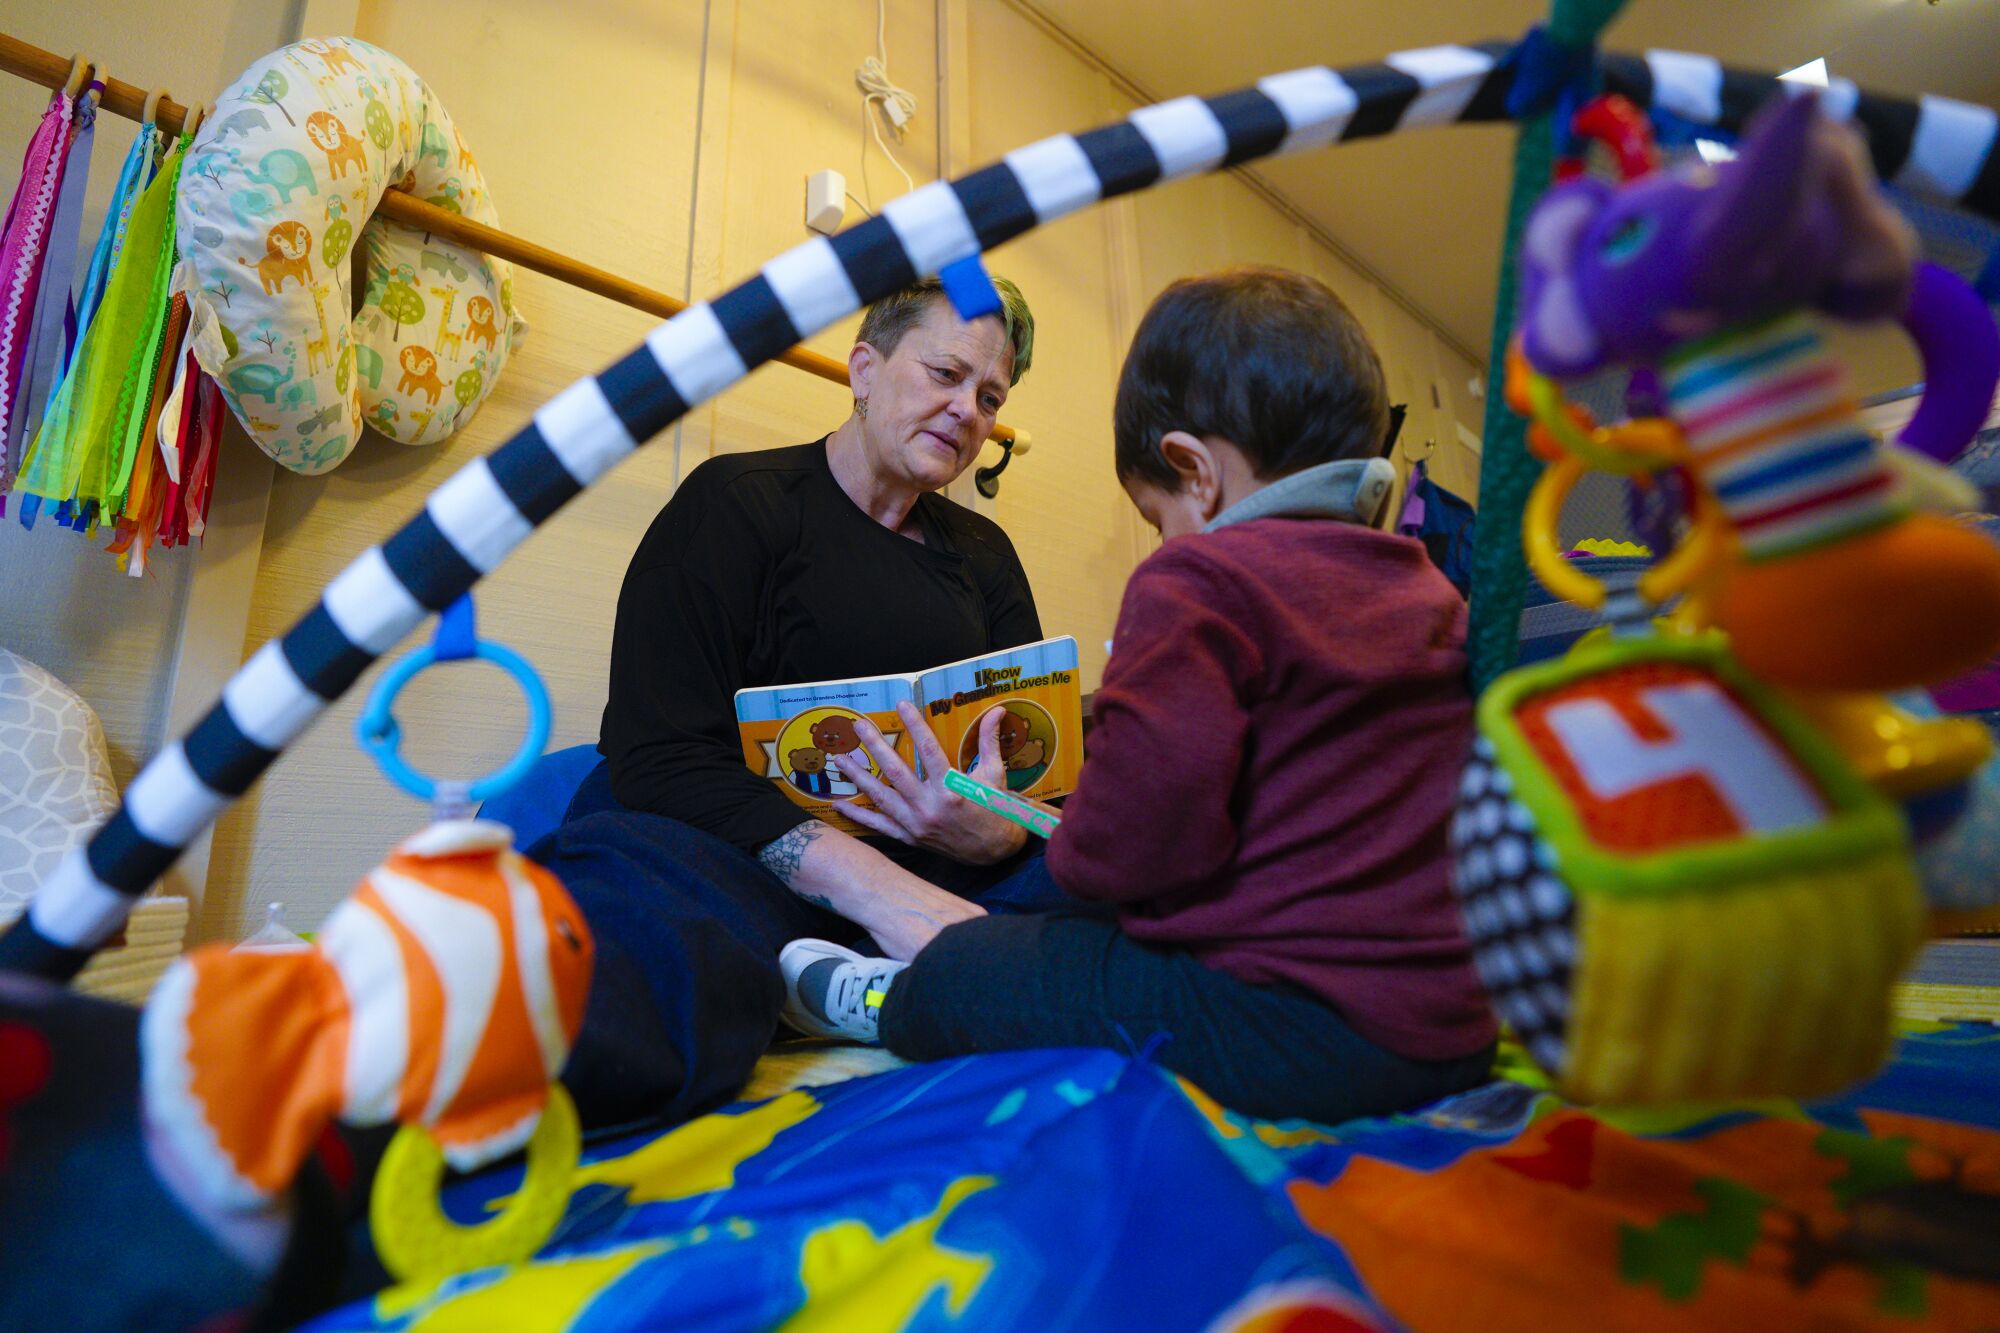 A woman holding a children's book sits across from a toddler, both surrounded by toys.